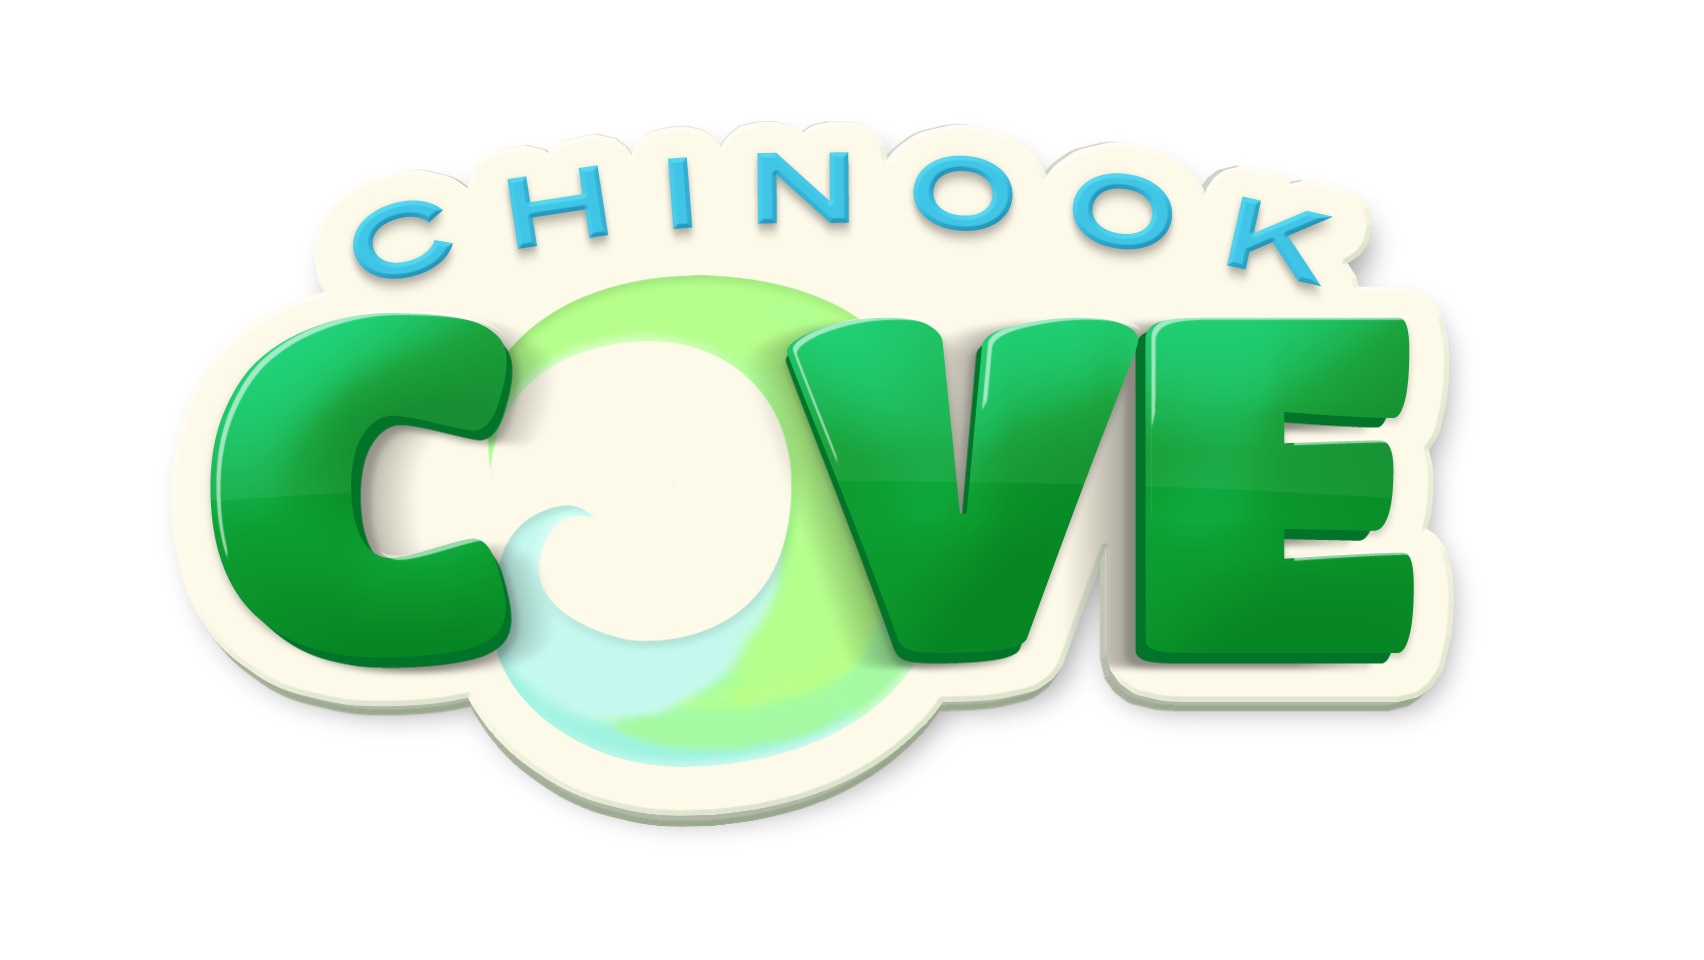 The logo for Chinook Cove